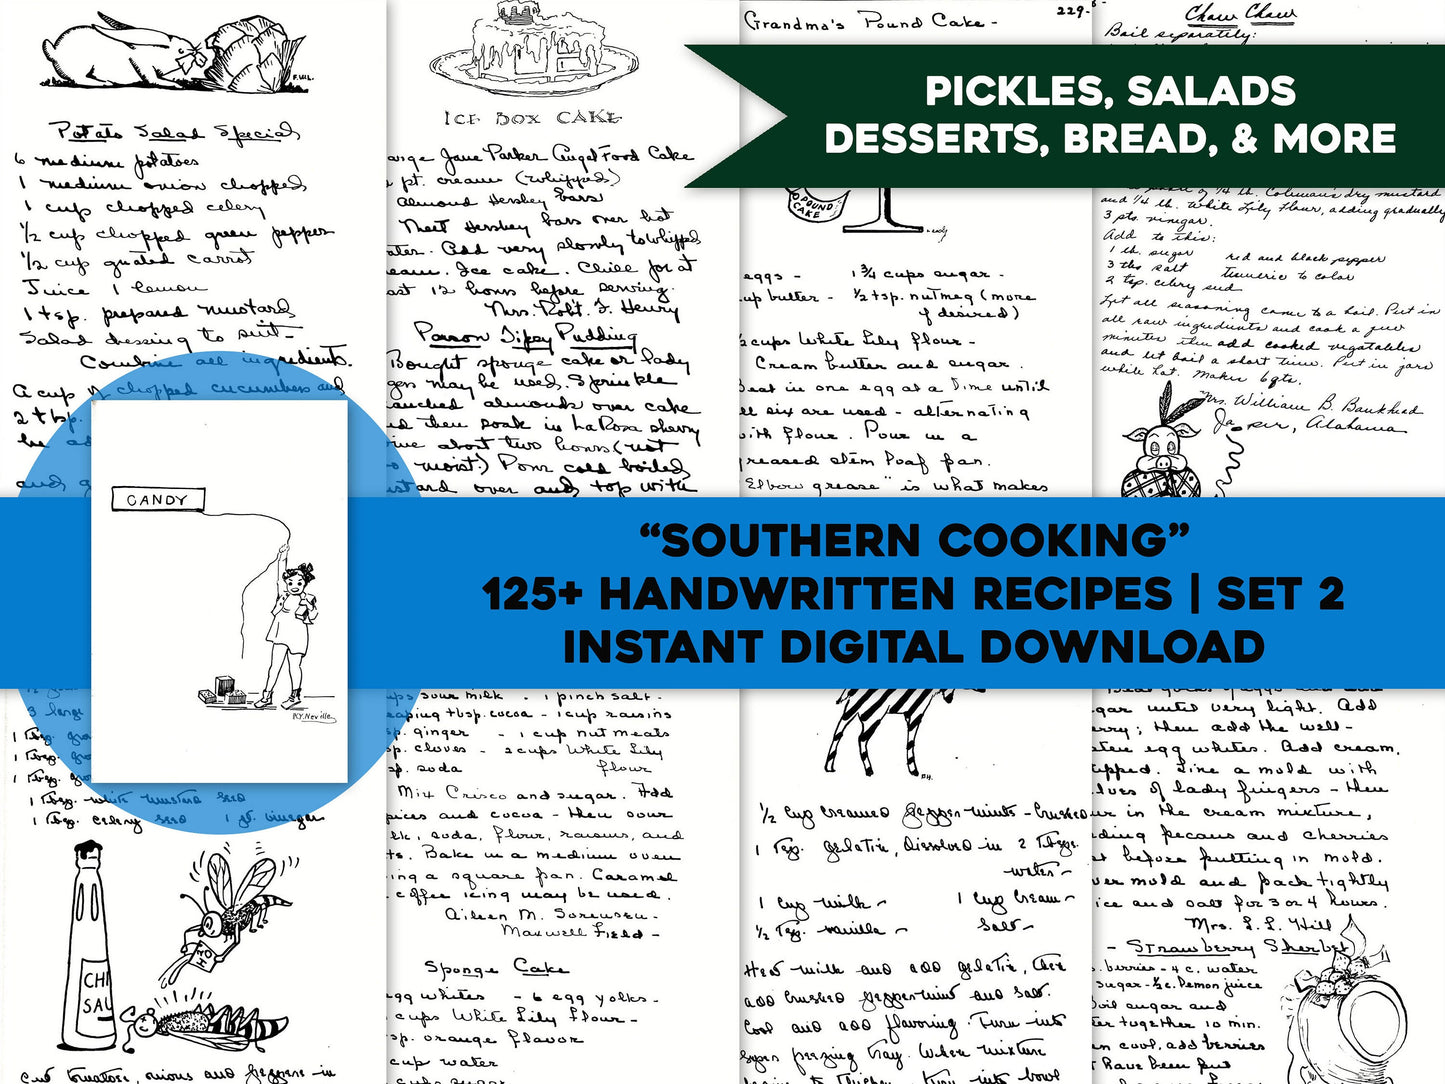 Southern Cooking Handwritten Recipes Set 2 [138 Images]